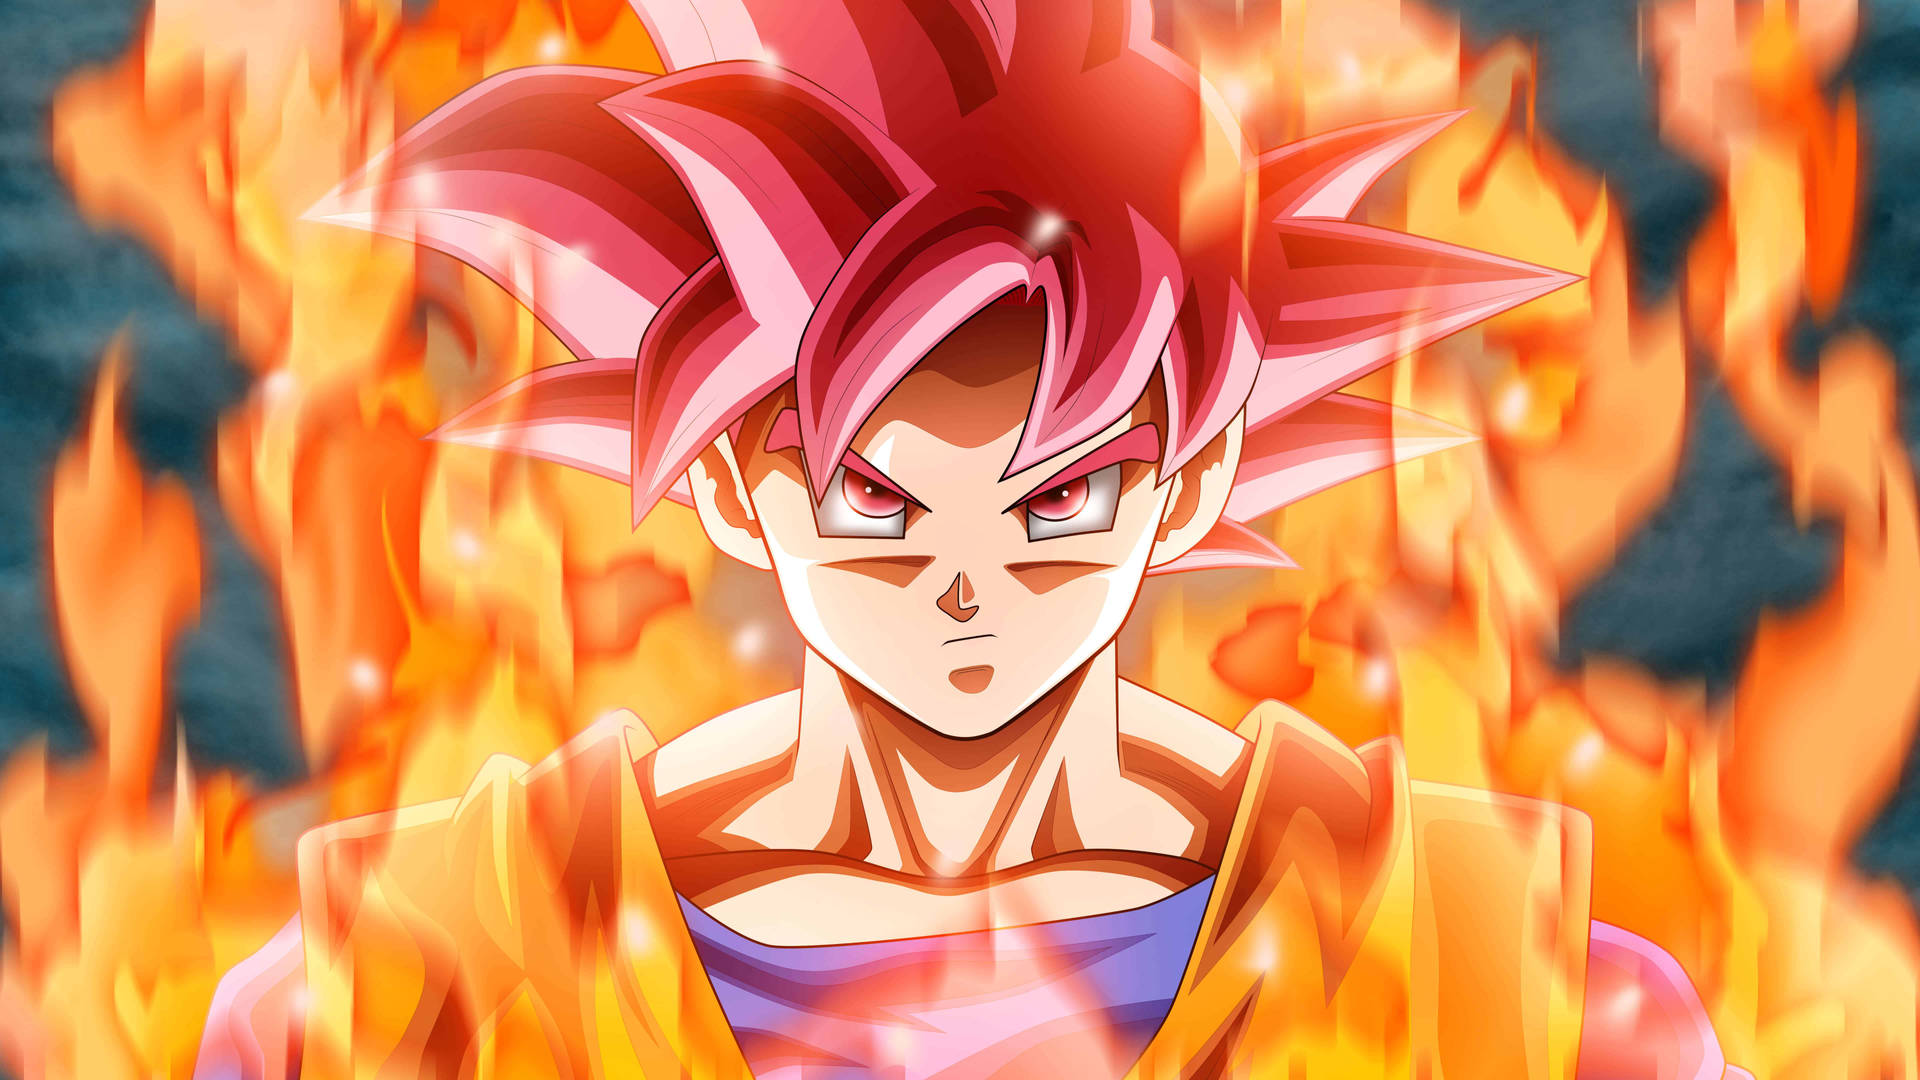 The powerful Saiyan Goku unleashes his strength in the epic anime series Dragon Ball Super. Wallpaper